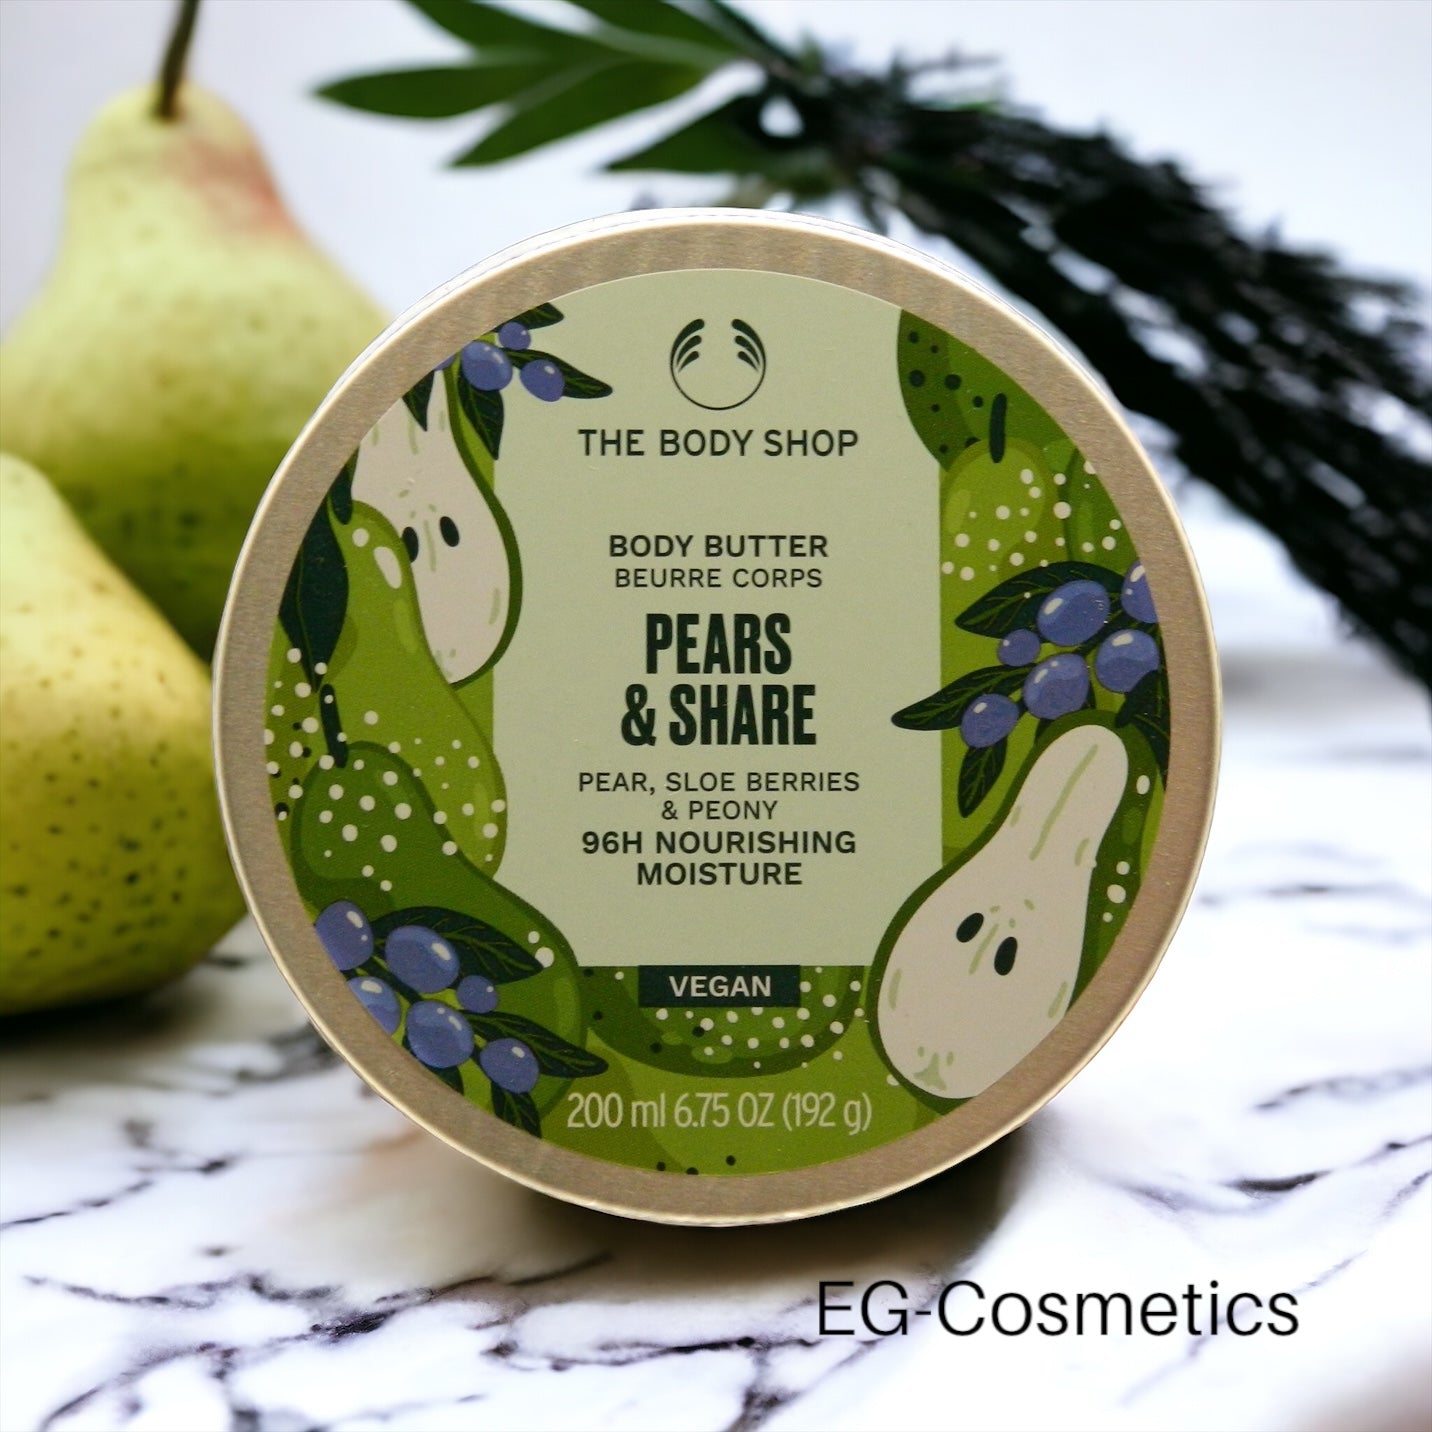 The Body Shop 'Pears & Shares' Body Butter 200ml